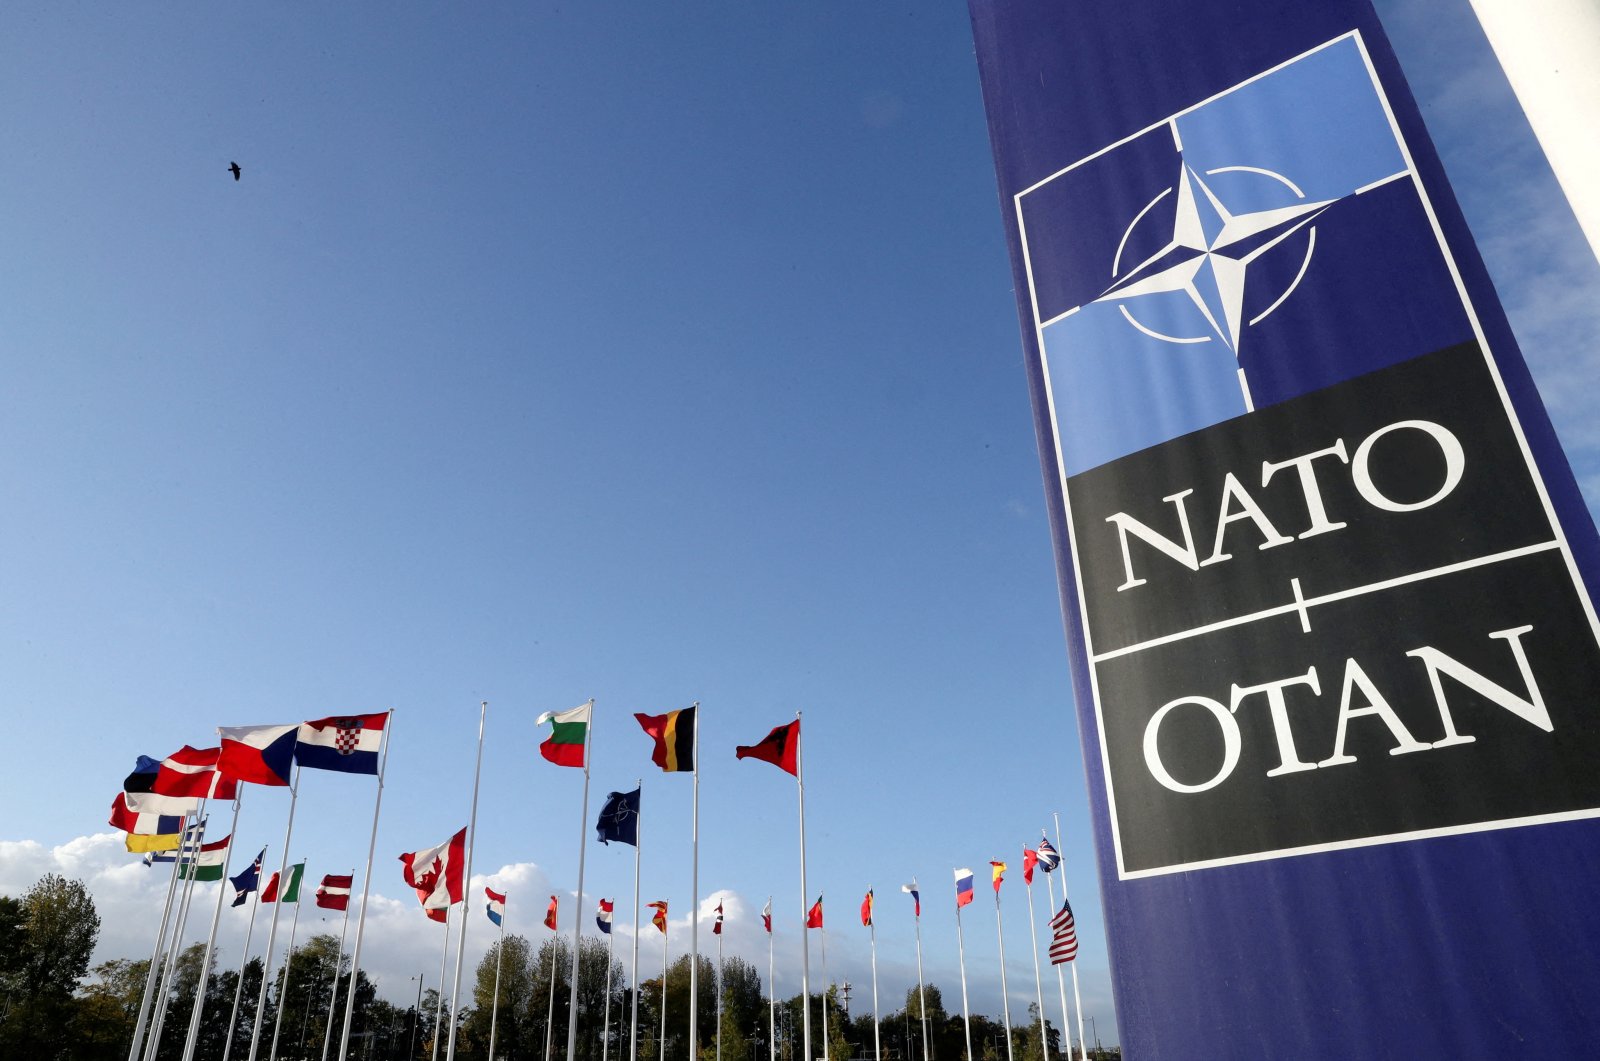 Flags wave outside the Alliance headquarters ahead of a NATO Defense Ministers meeting, in Brussels, Belgium, Oct. 21, 2021. (Reuters File Photo)